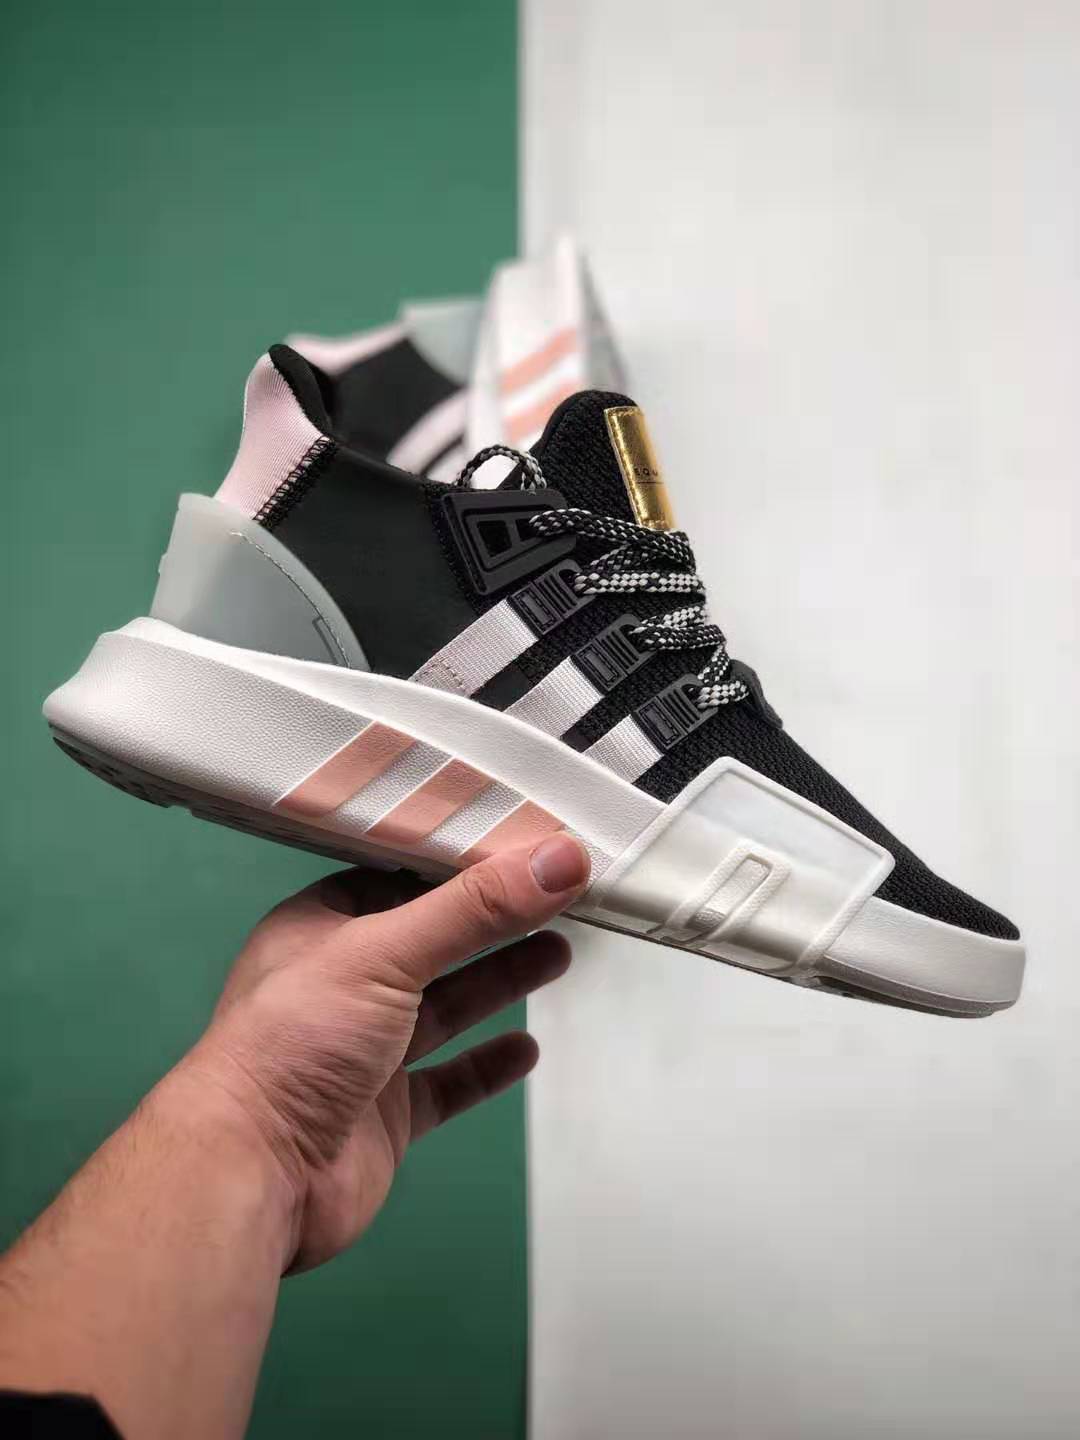 Adidas EQT Bask ADV 'Orchid Tint' EE5044 - Stylish and Functional Footwear